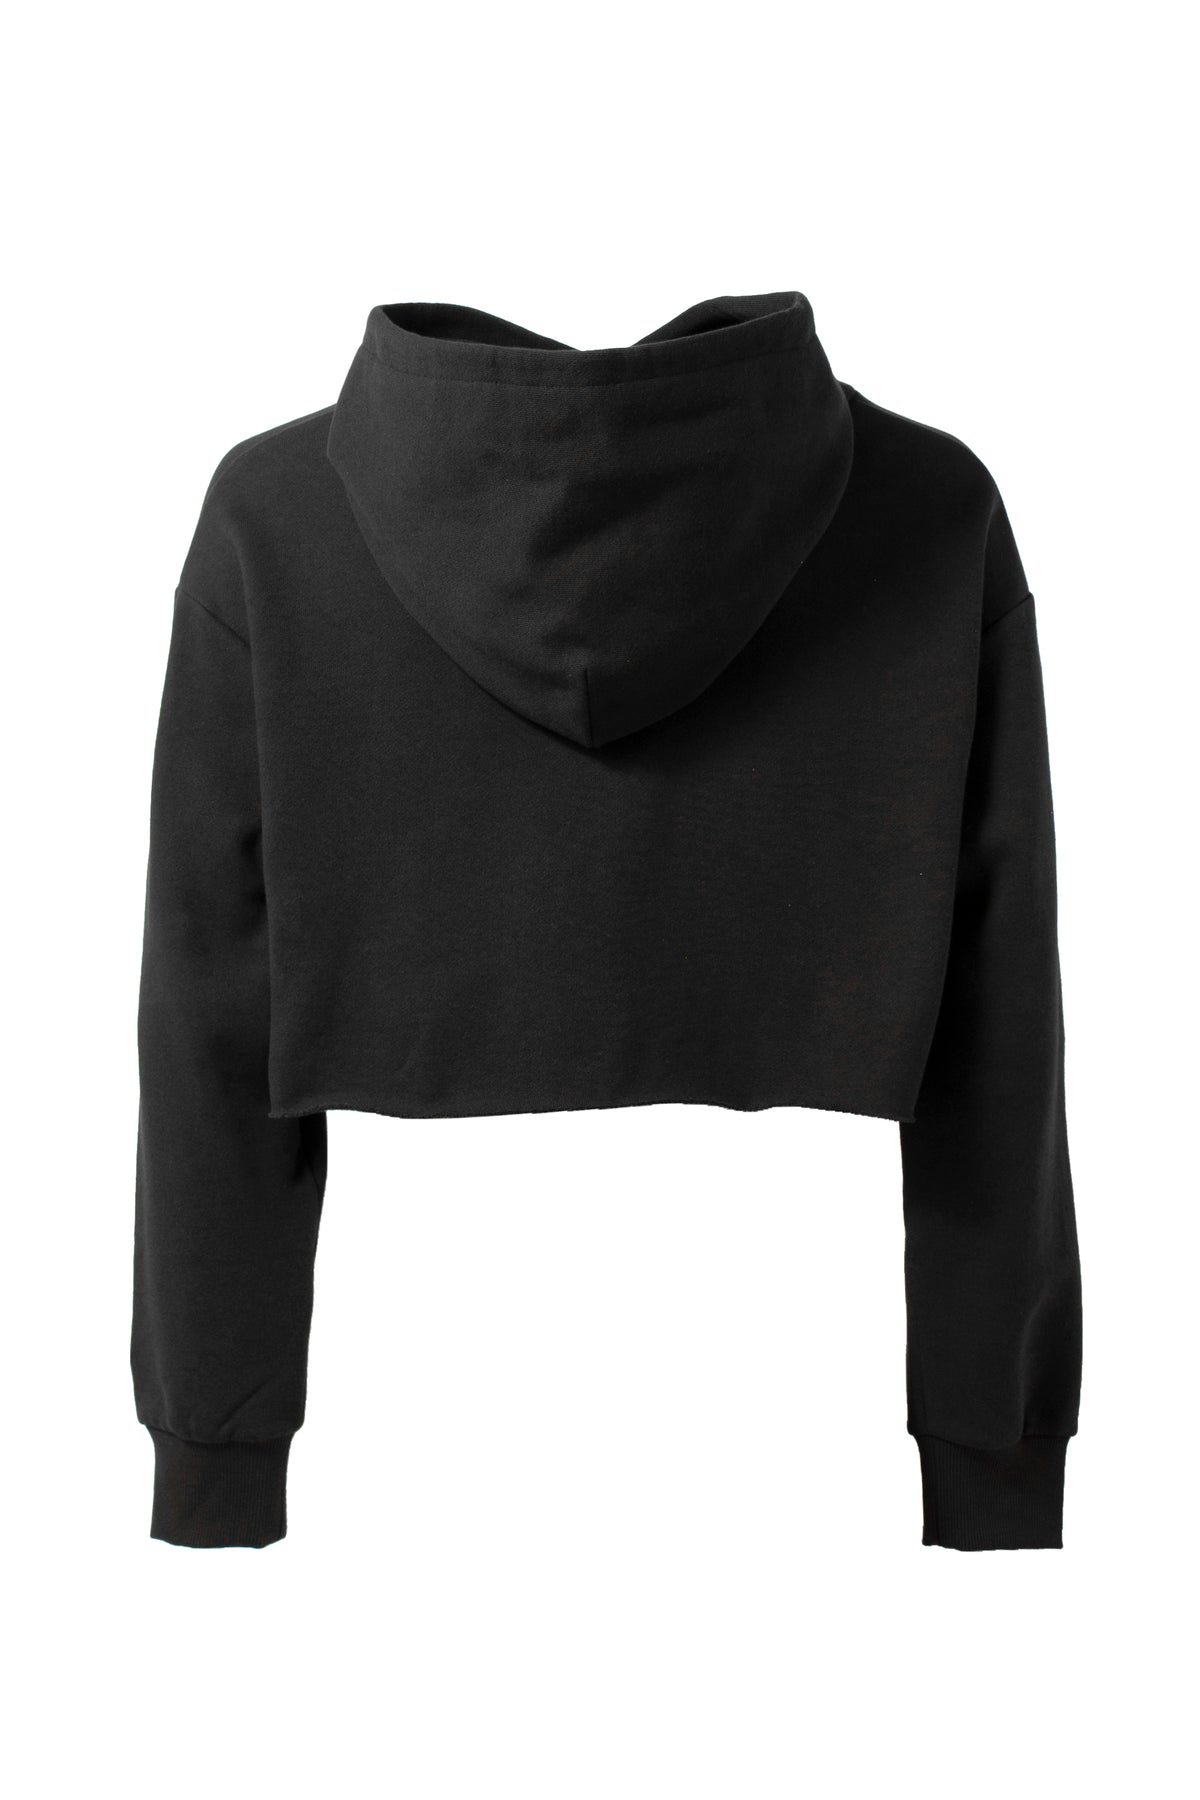 GIRL GLITTER PRINT CROPPED HOODED SWEATER 'NEWHELL
 / BLK